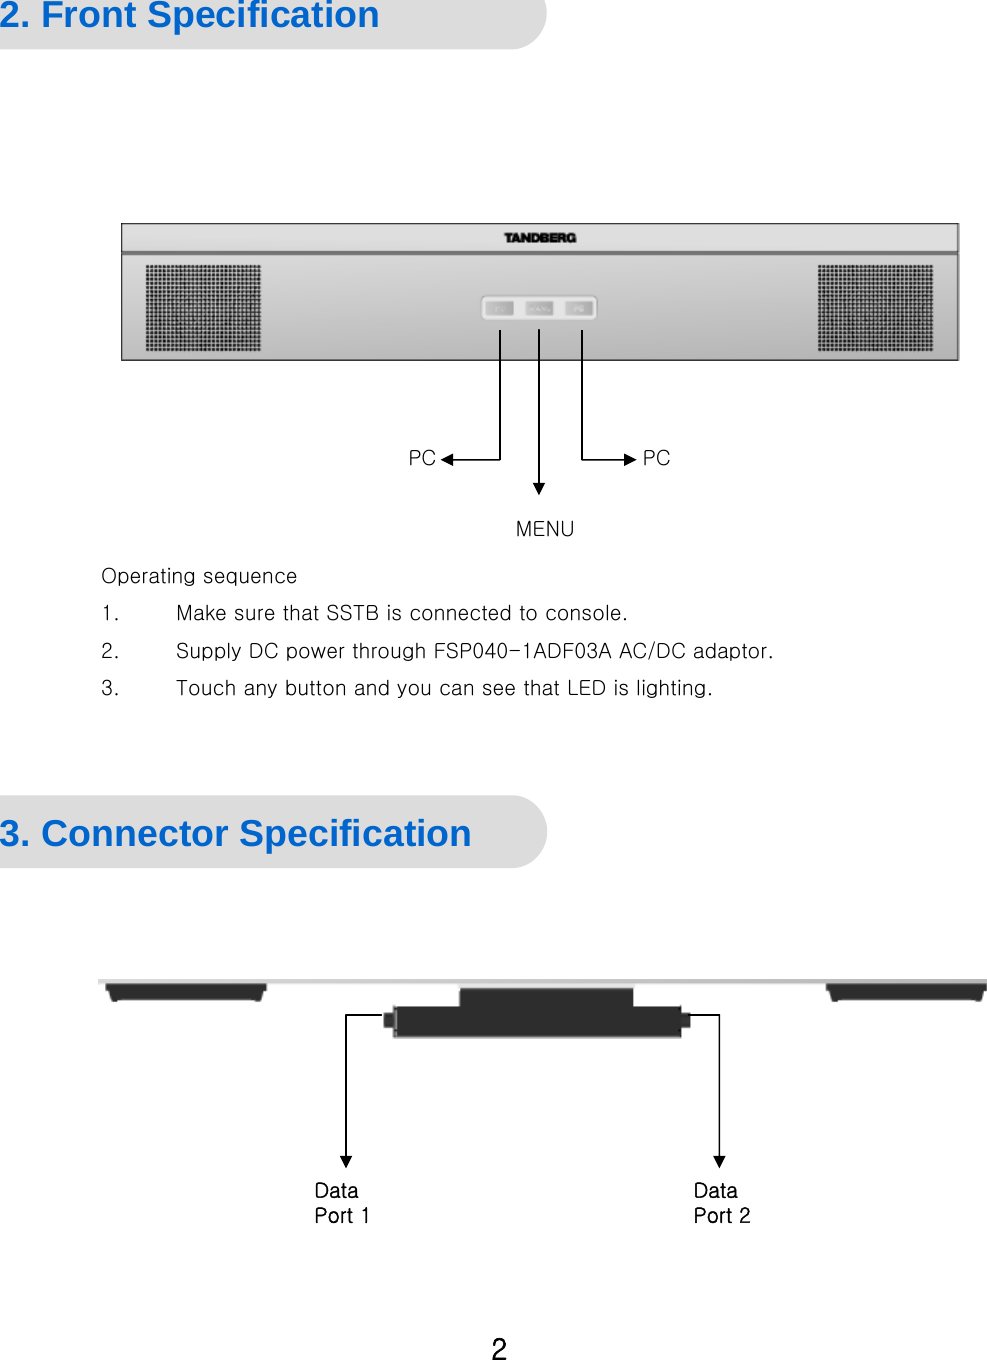 General Specification 2. Front SpecificationPC2PCMENU3. Connector SpecificationData Port 1Data Port 2Operating sequence1. Make sure that SSTB is connected to console.2. Supply DC power through FSP040-1ADF03A AC/DC adaptor.3. Touch any button and you can see that LED is lighting.